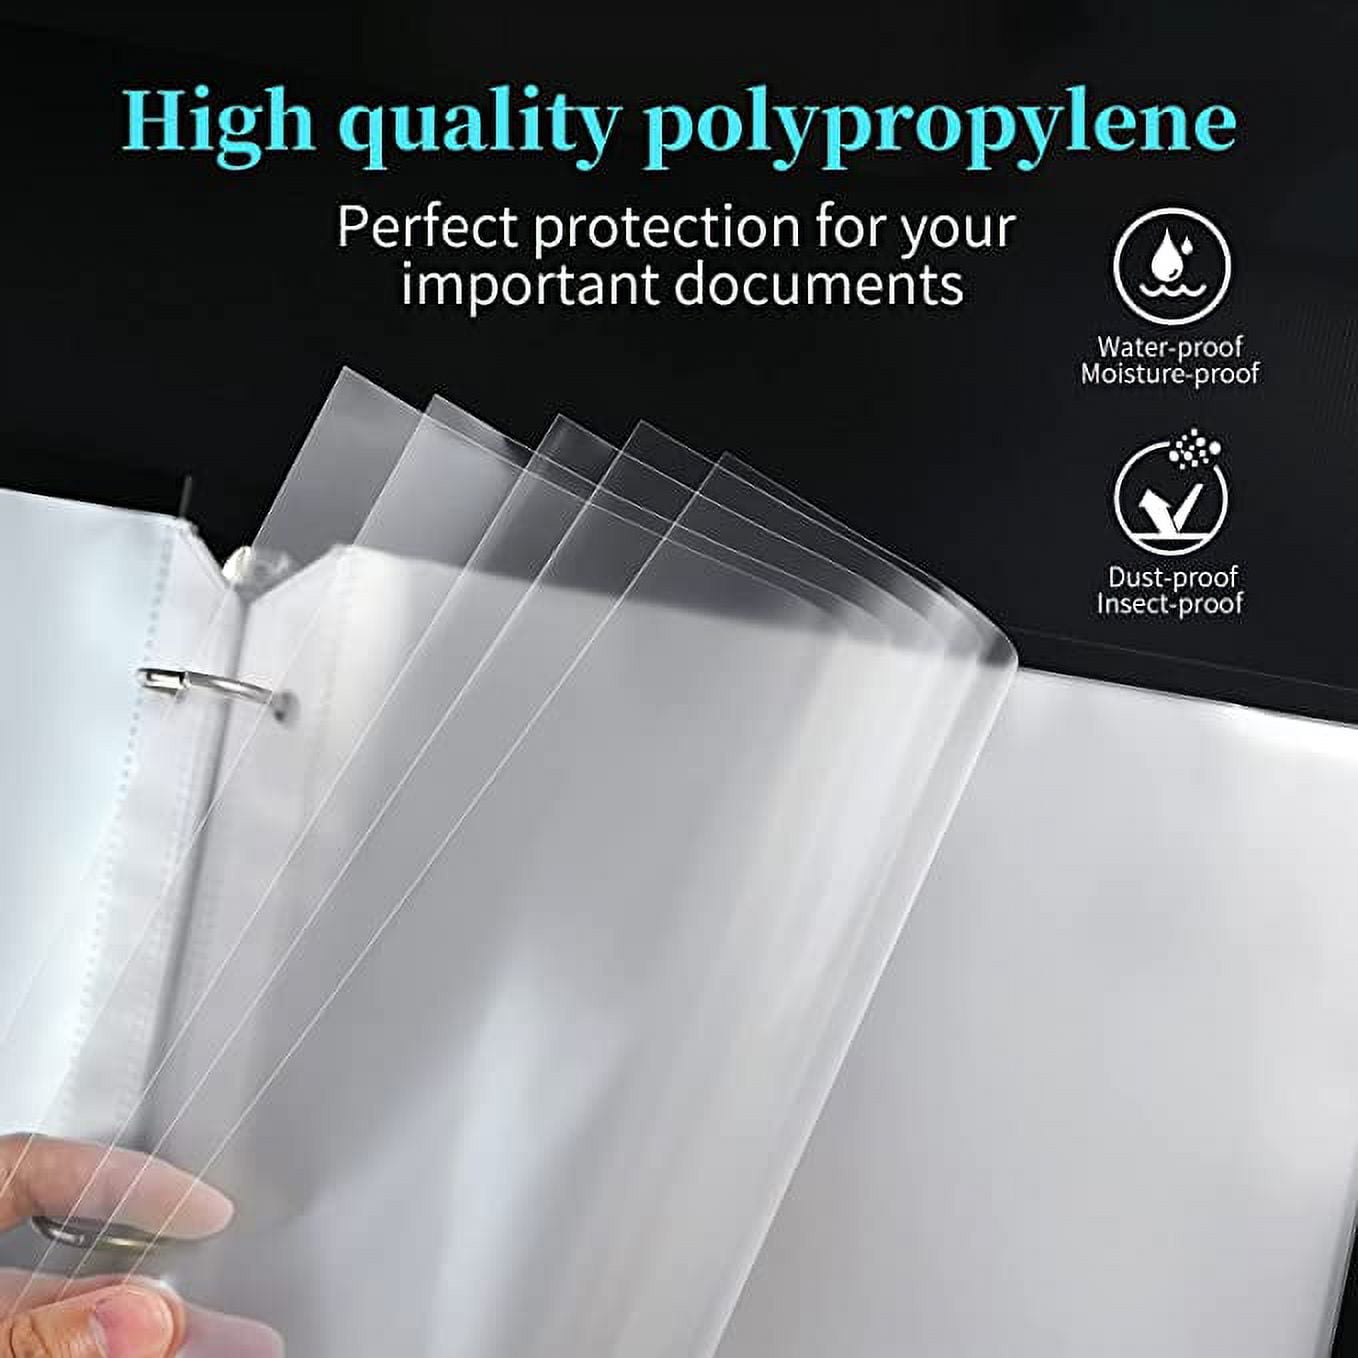 VST Sheet Protectors 8.5 x 11 Inches Crystal Clear Page Protectors for 3  Ring Binder, Medium Weight Plastic Sleeves, Top Loading Paper Protector  Acid